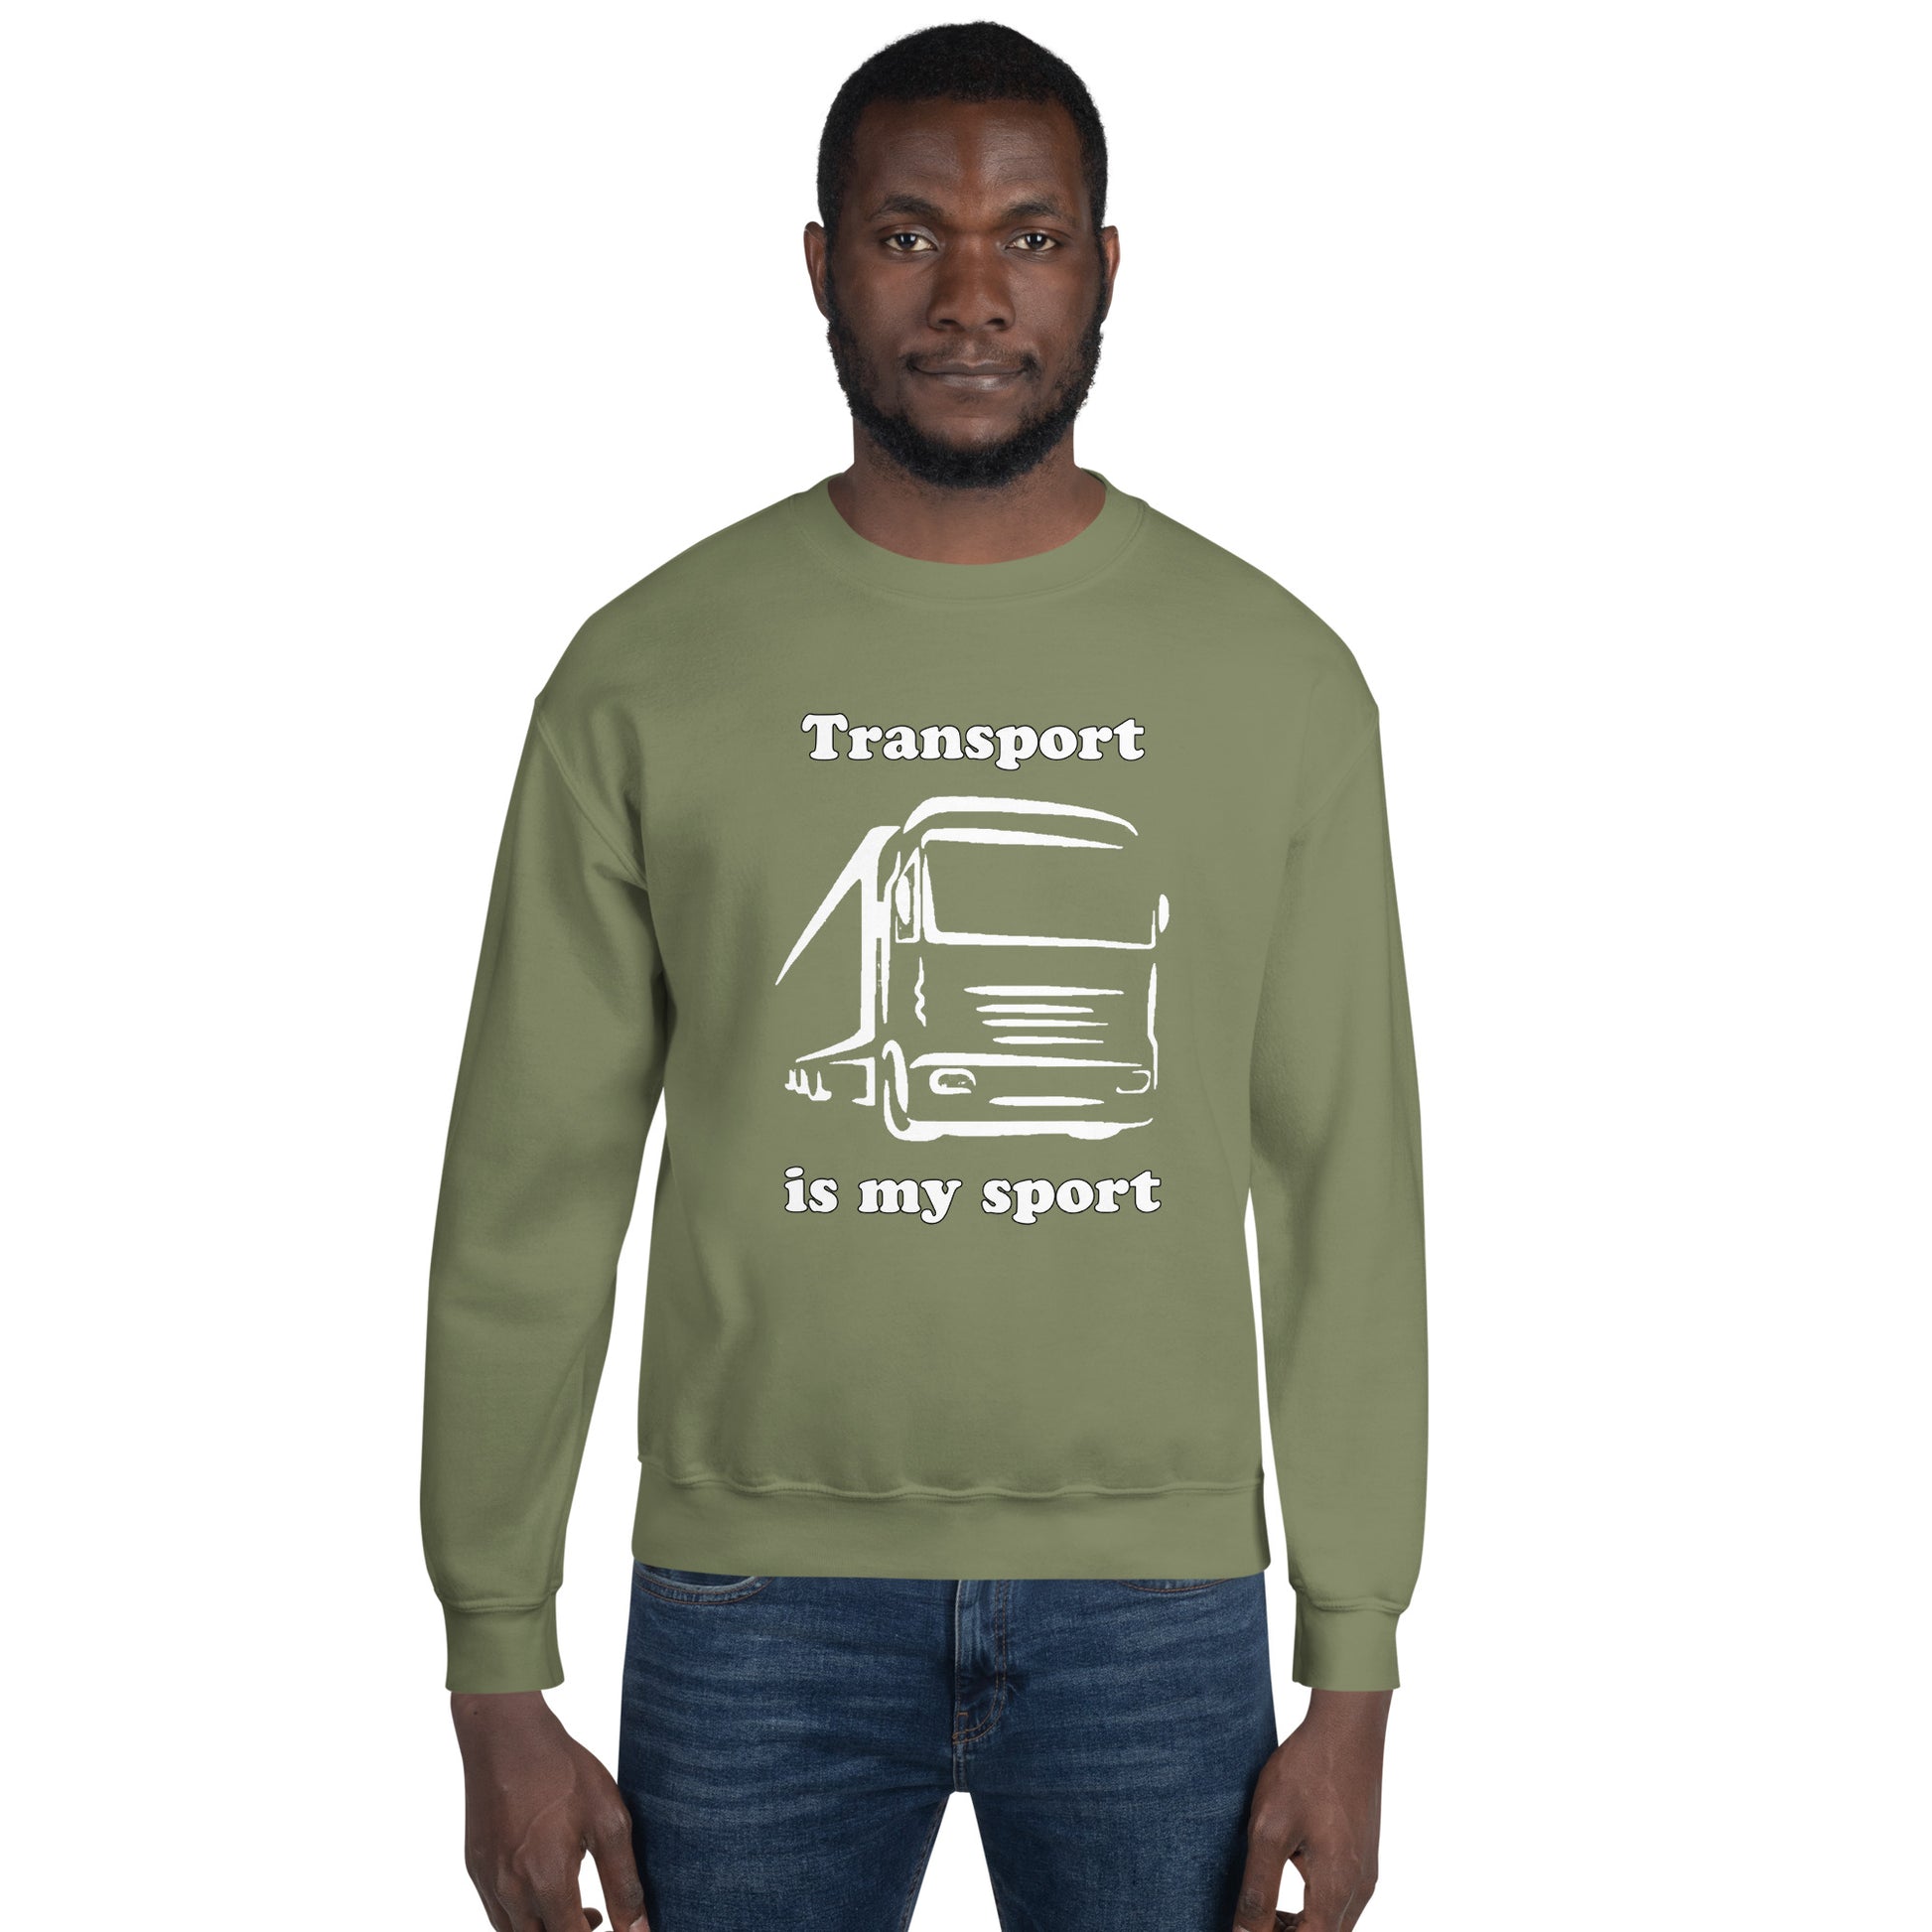 Man with military green sweatshirt with picture of truck and text "Transport is my sport"